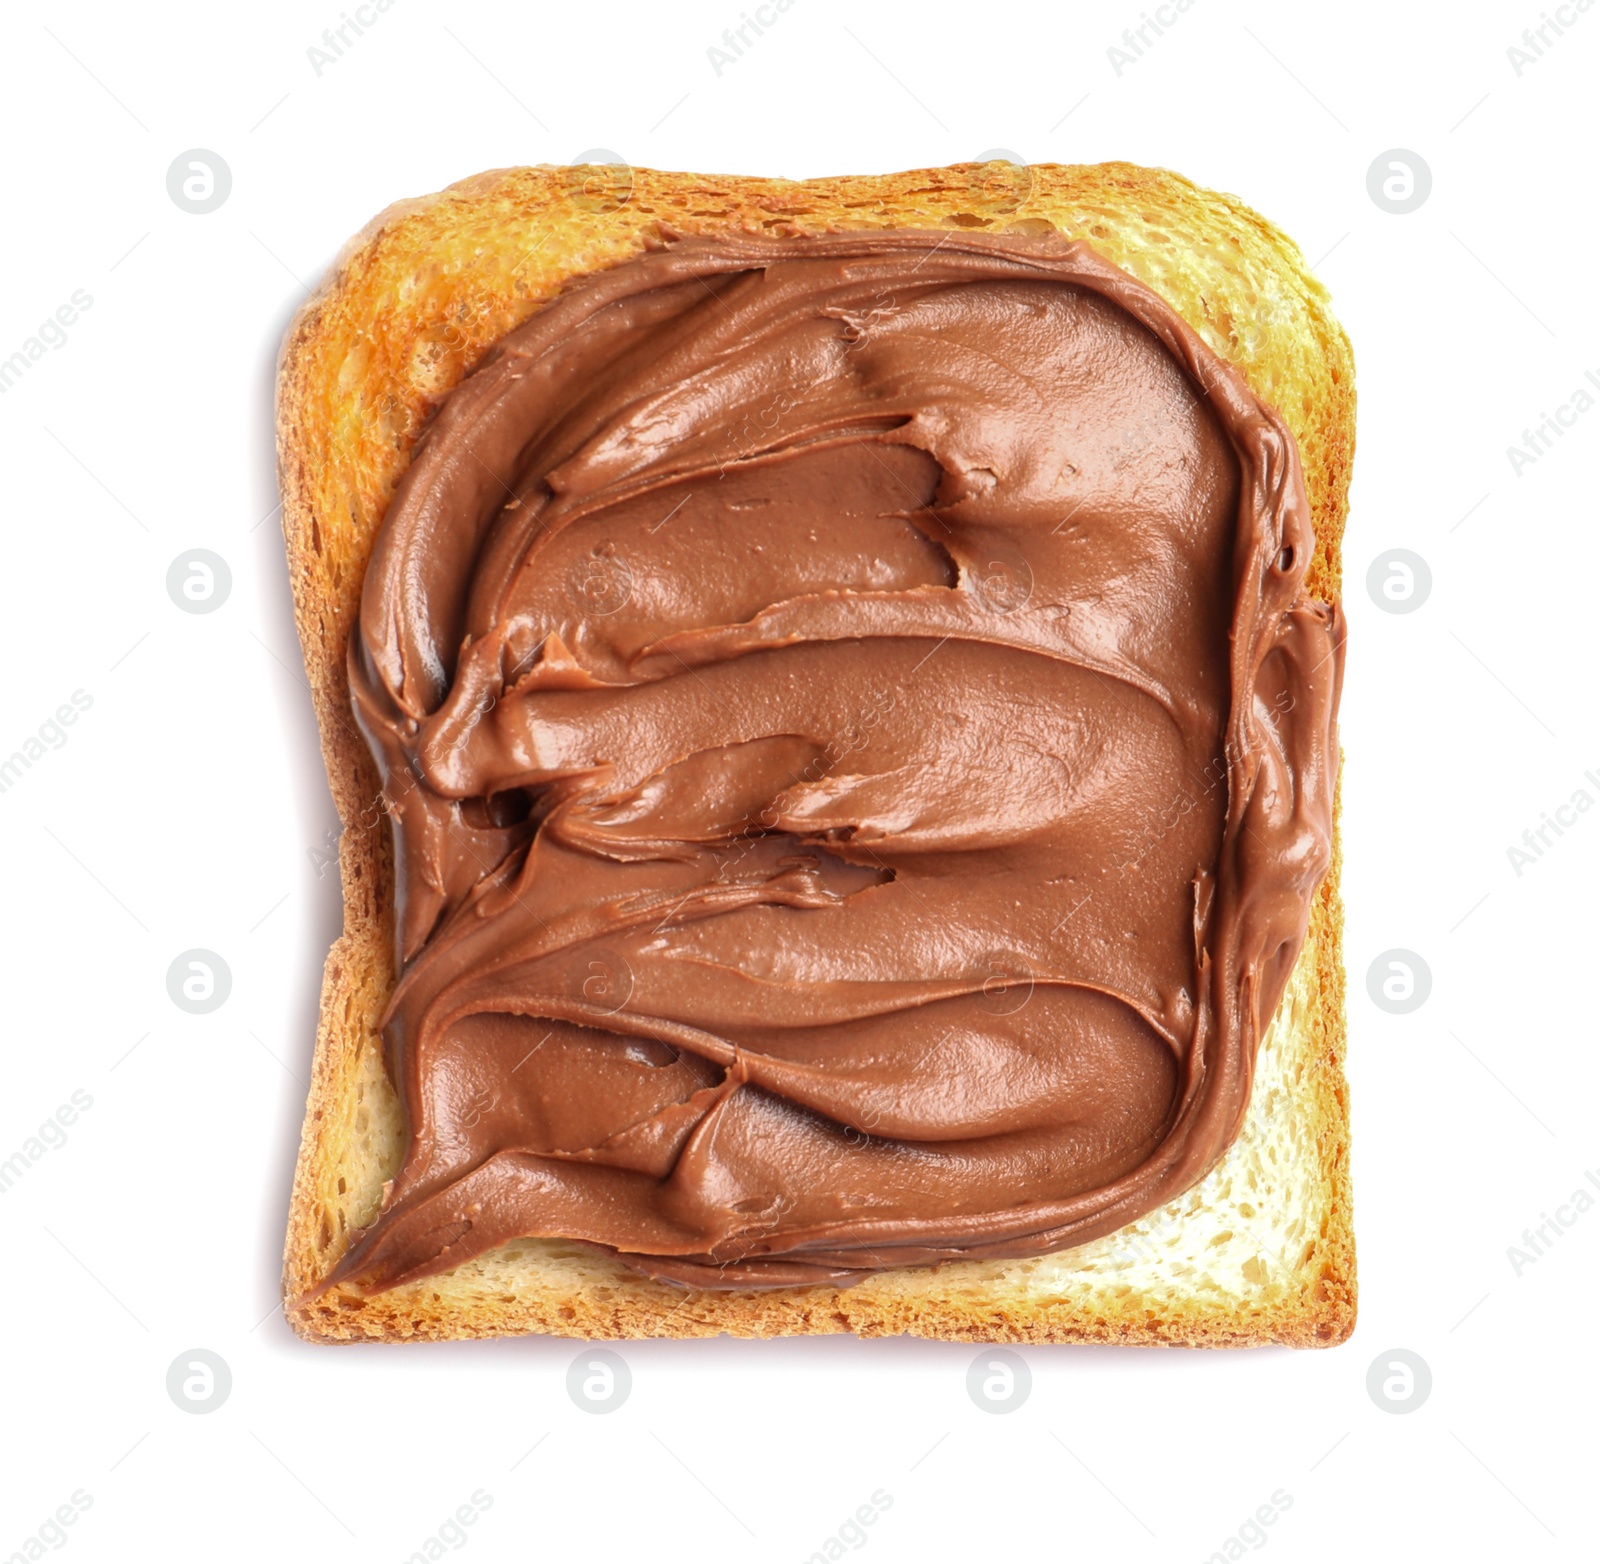 Photo of Toast bread with tasty chocolate spread on white background